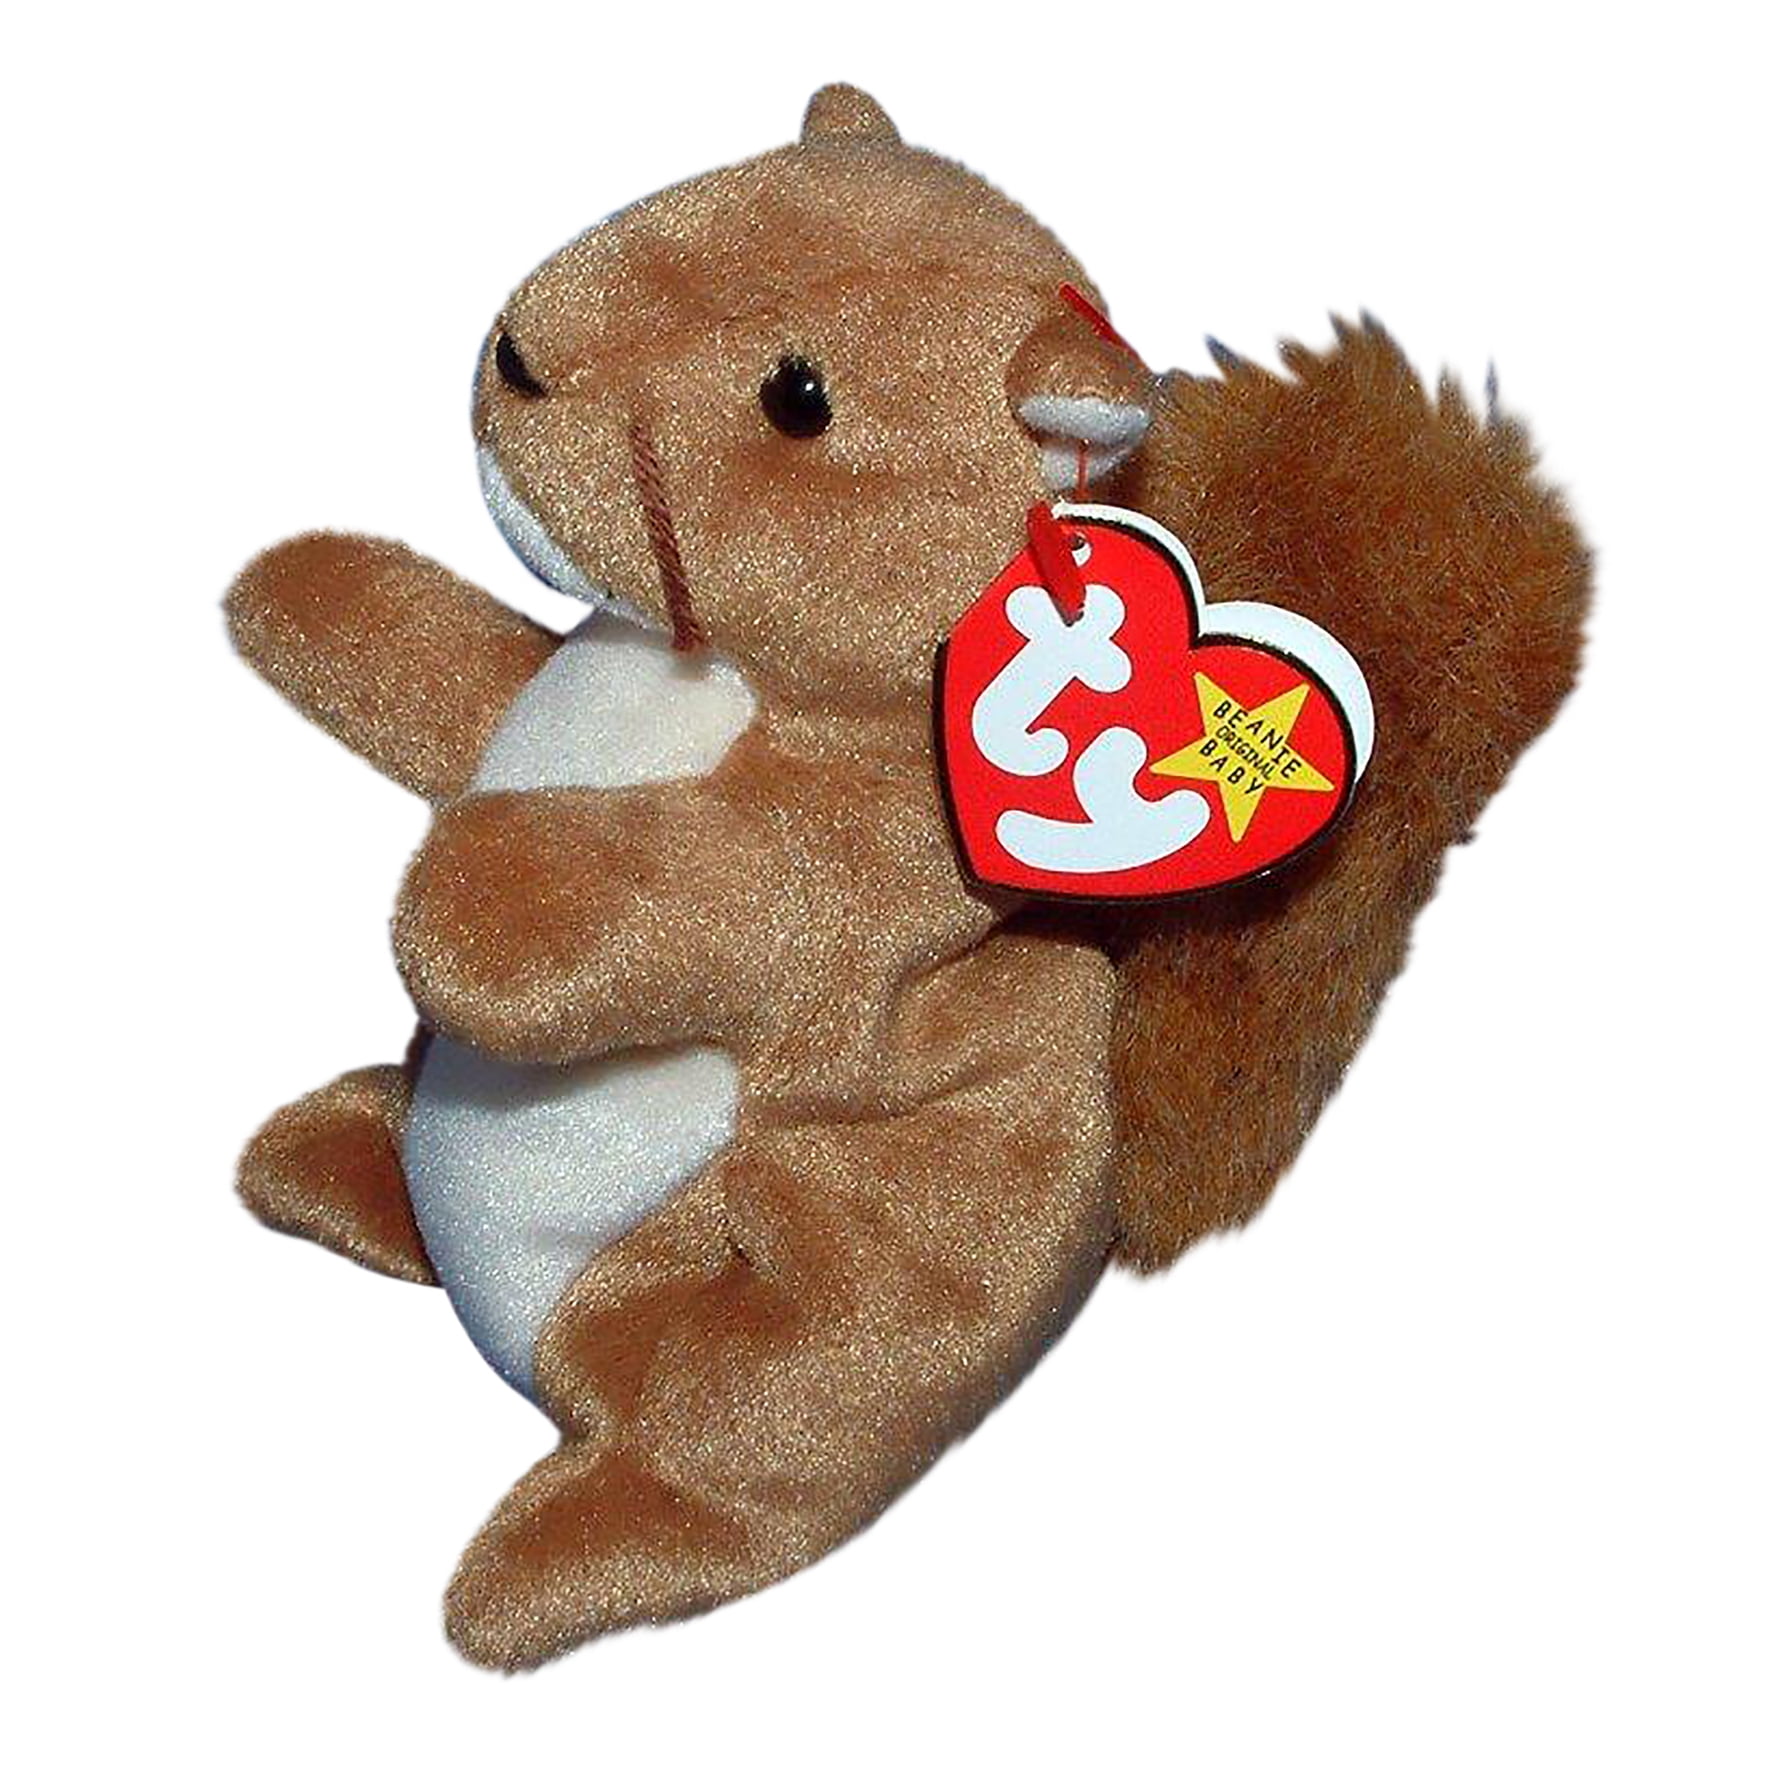 Ty Beanie Baby: Nuts the Squirrel | Stuffed Animal | MWMT